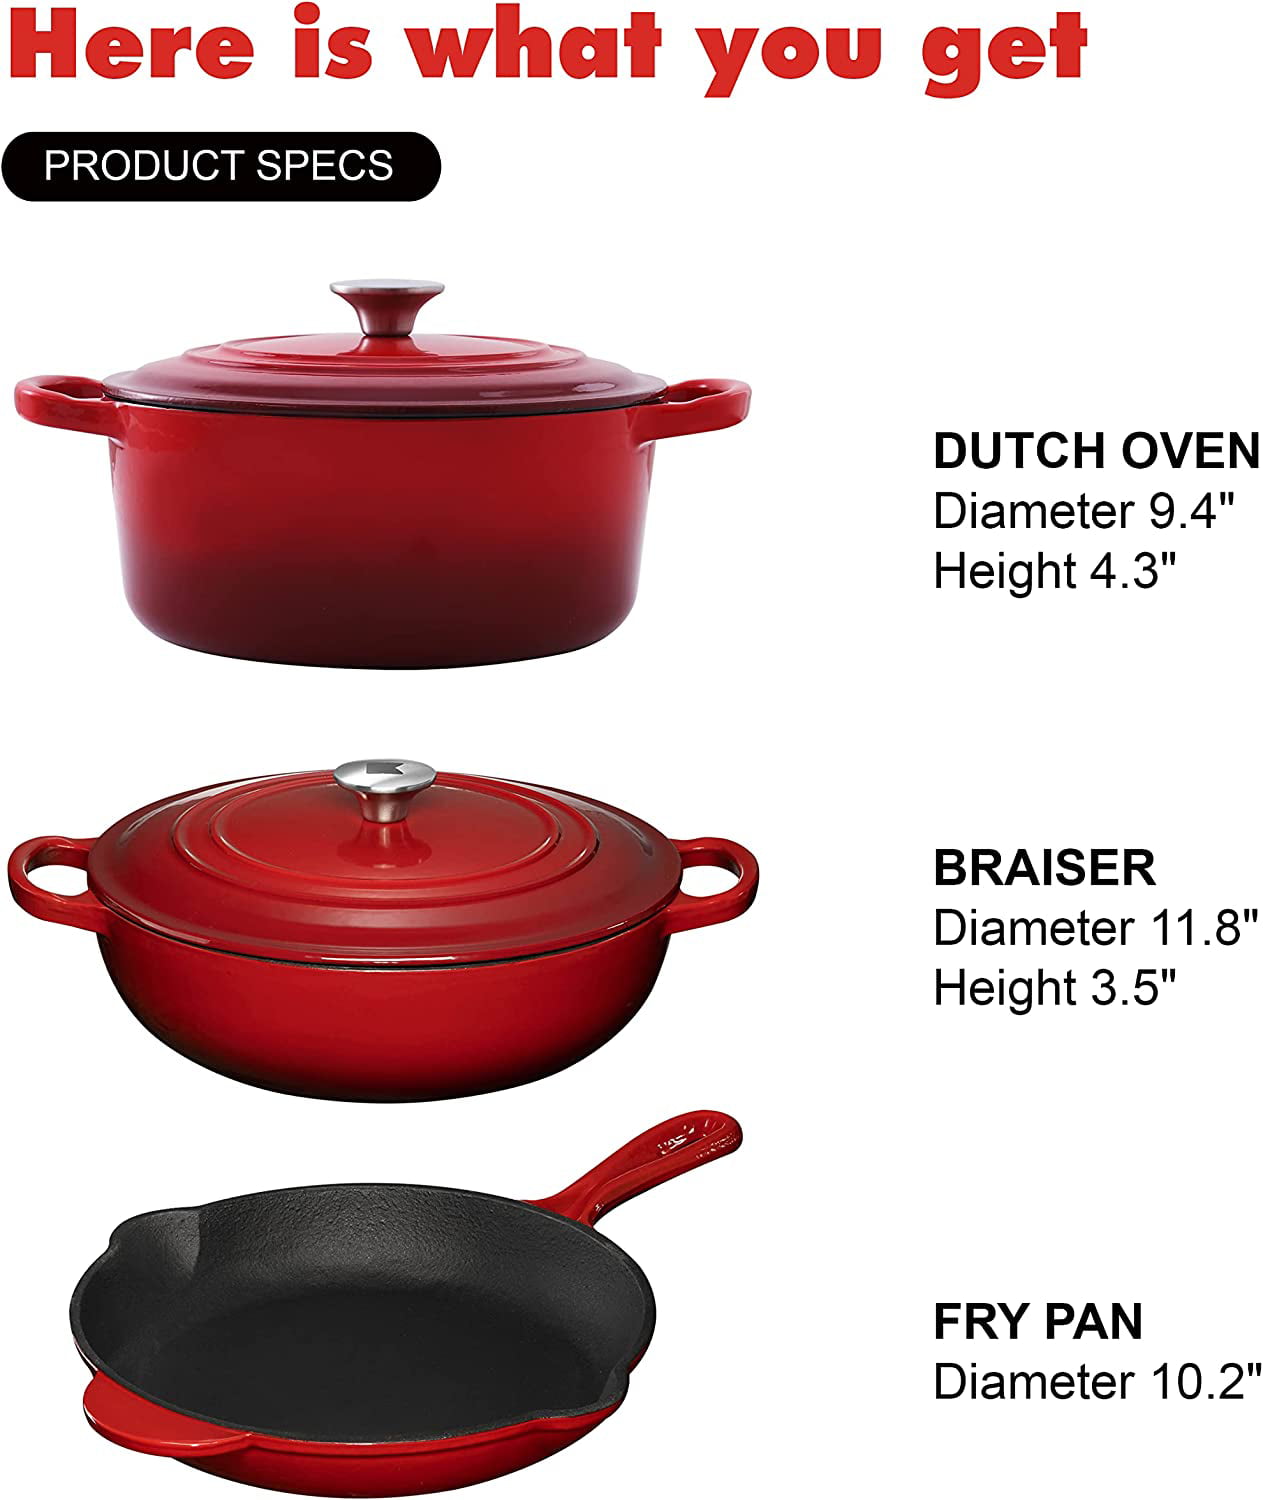 Enameled Cast Iron Cookware Set - 5 Pieces Solid Colored Braiser Dish, Fry  Pan, & Dutch Oven Pot with Lids - Heavy Duty Non-Stick Kitchen Cookware